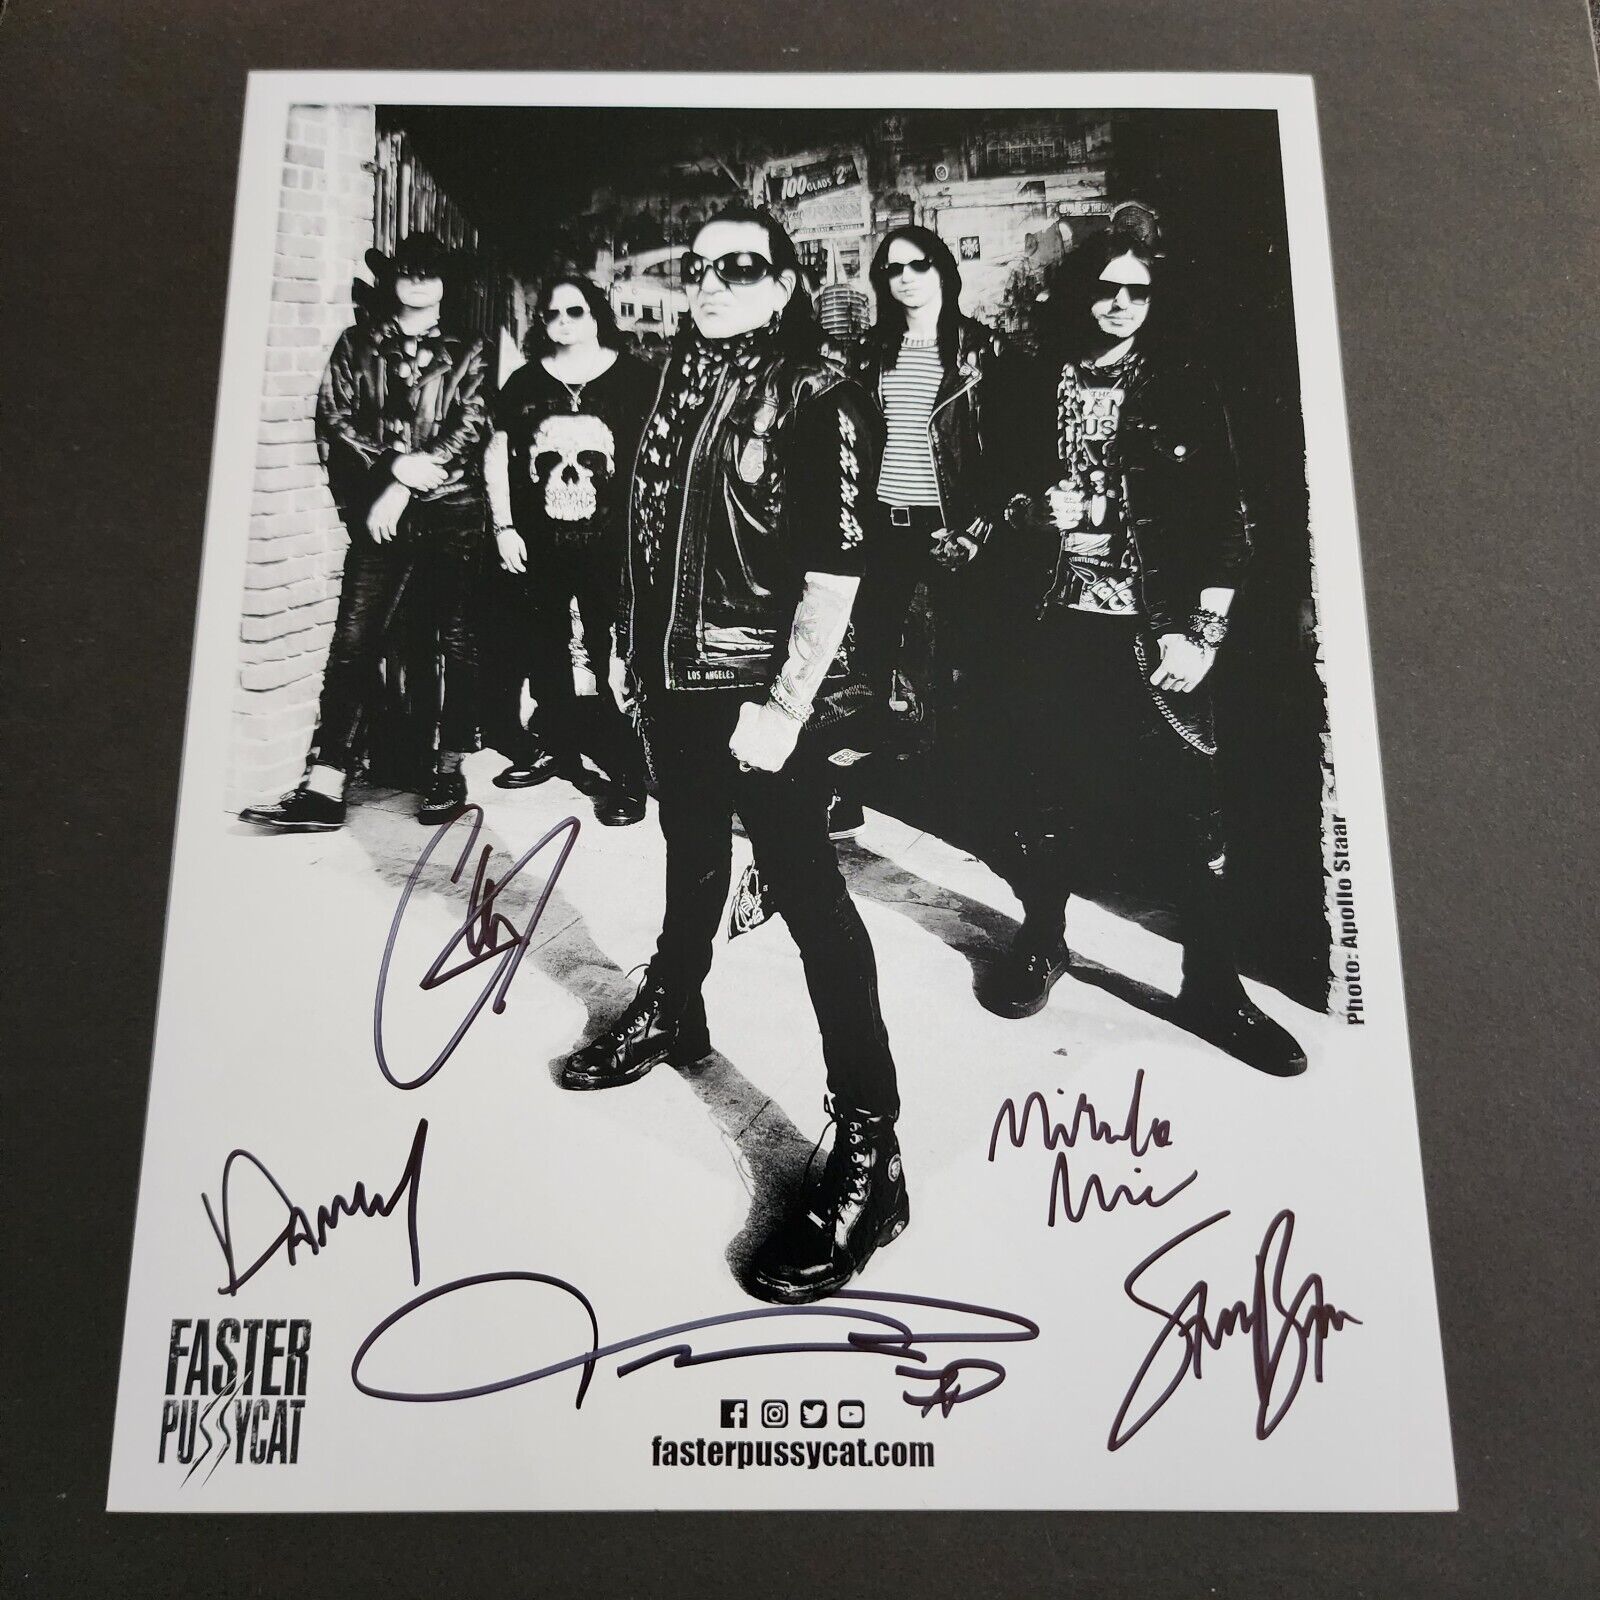 FASTER PUSSYCAT 2023 Signed by full band - 8x10 Photo